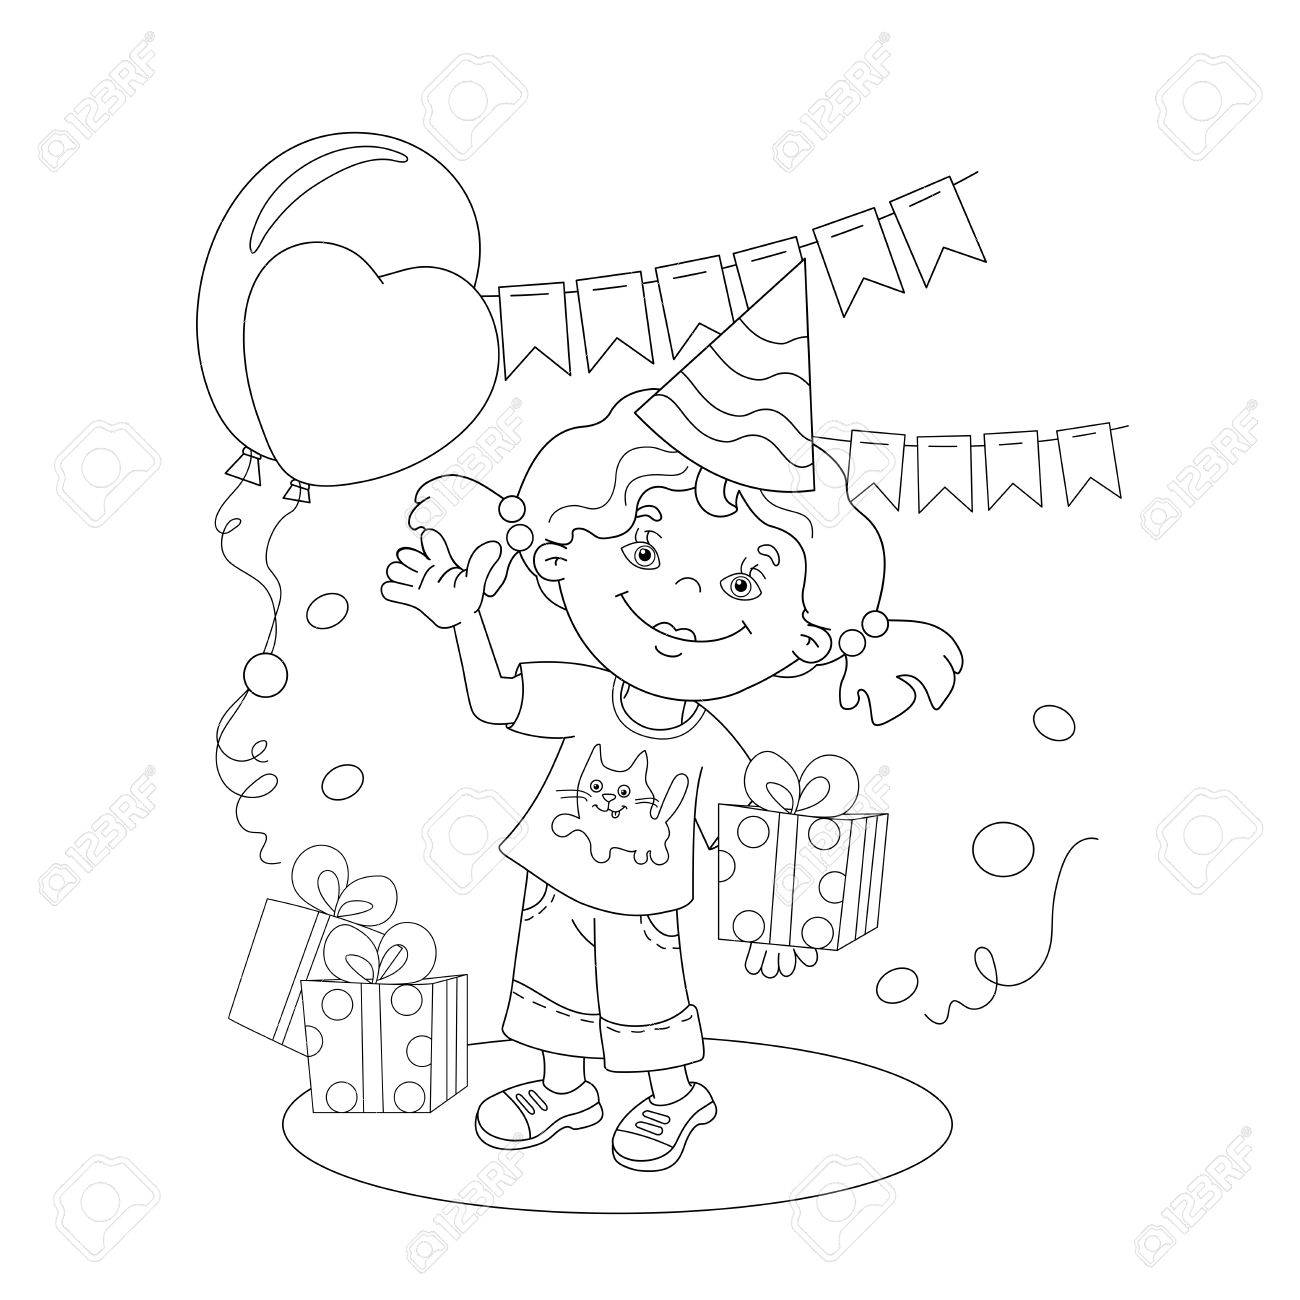 Coloring page outline of cartoon girl with a gift at the holiday coloring book for kids royalty free svg cliparts vectors and stock illustration image